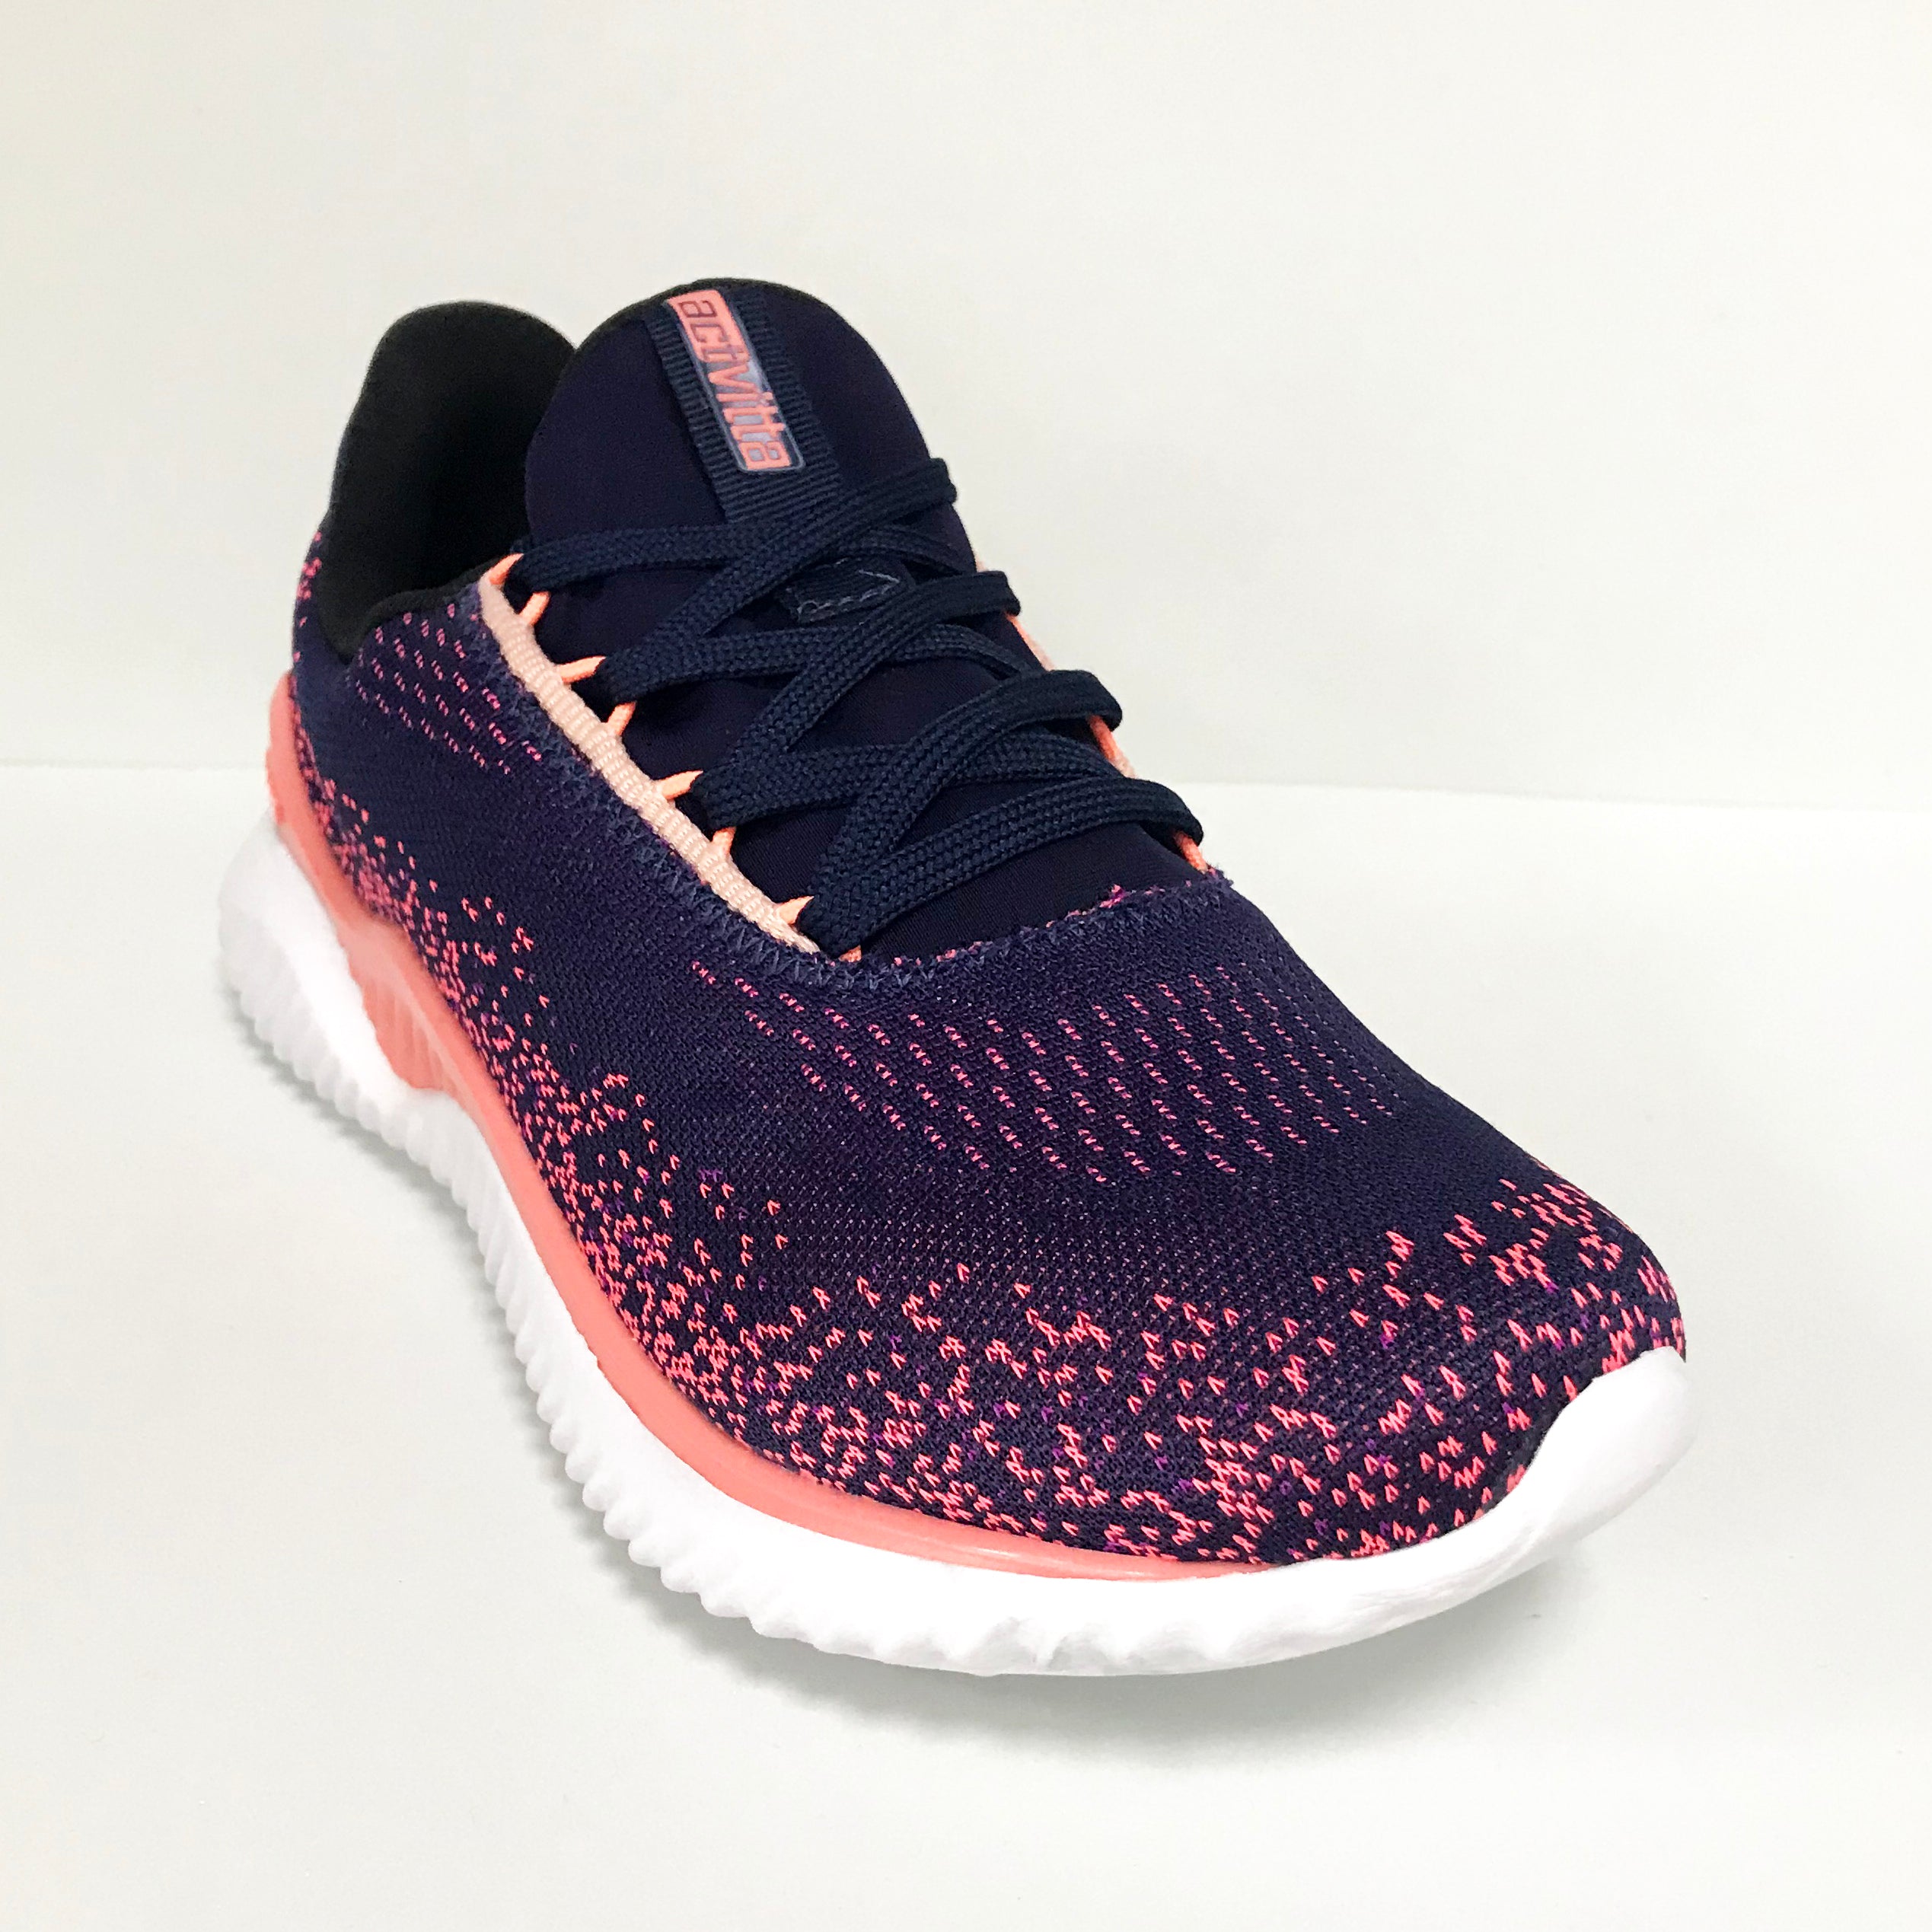 Actvitta 4802-101 Lace up Sneaker in Multi Navy